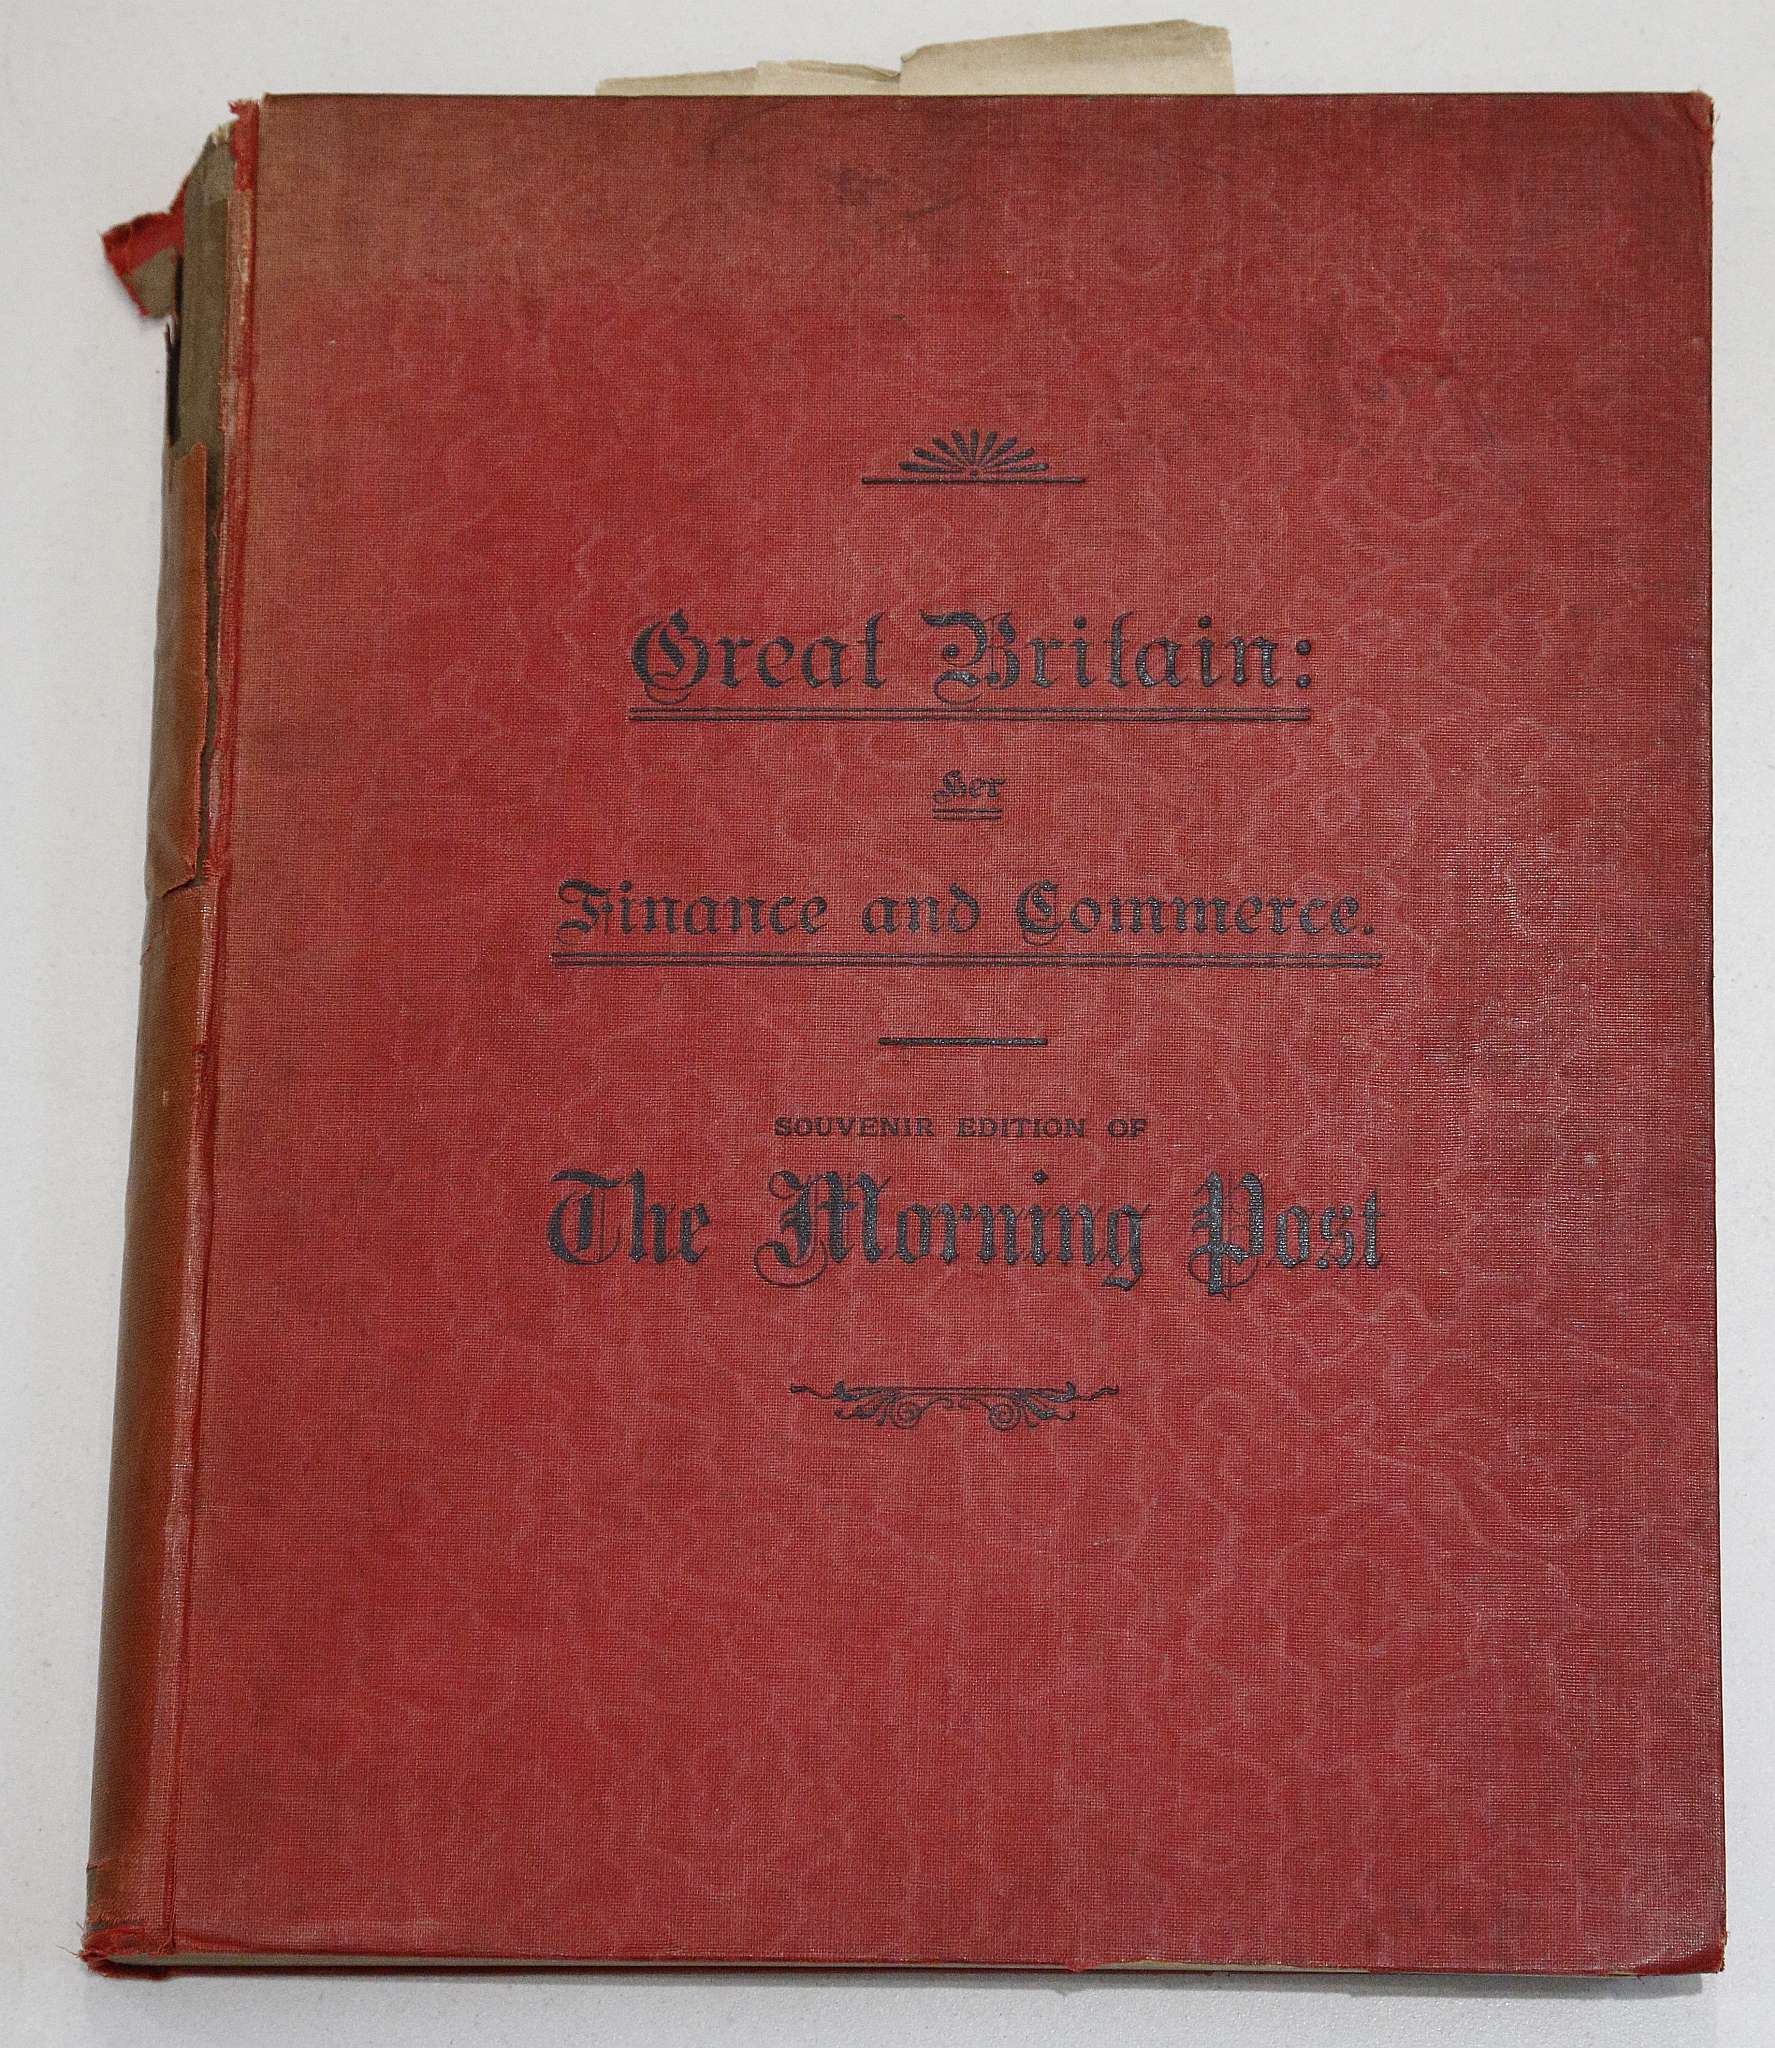 Great Britain: Her Finance and Commerce. Souvenir Edition of the Morning Post. London, ''The Morning